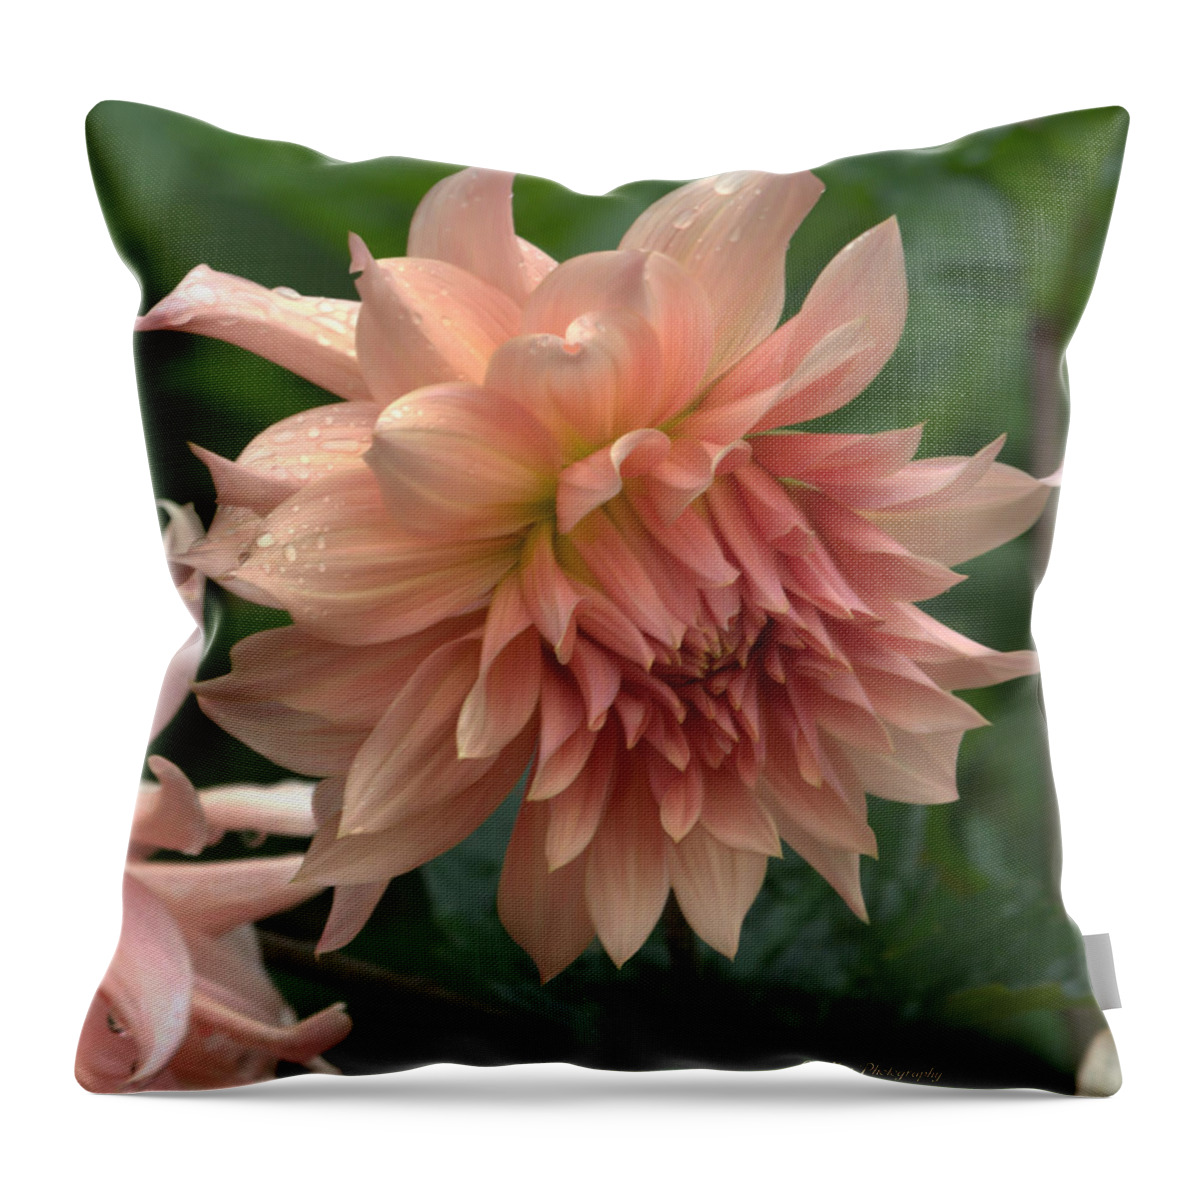 Dahlia Throw Pillow featuring the photograph Dancing In The Rain by Jeanette C Landstrom